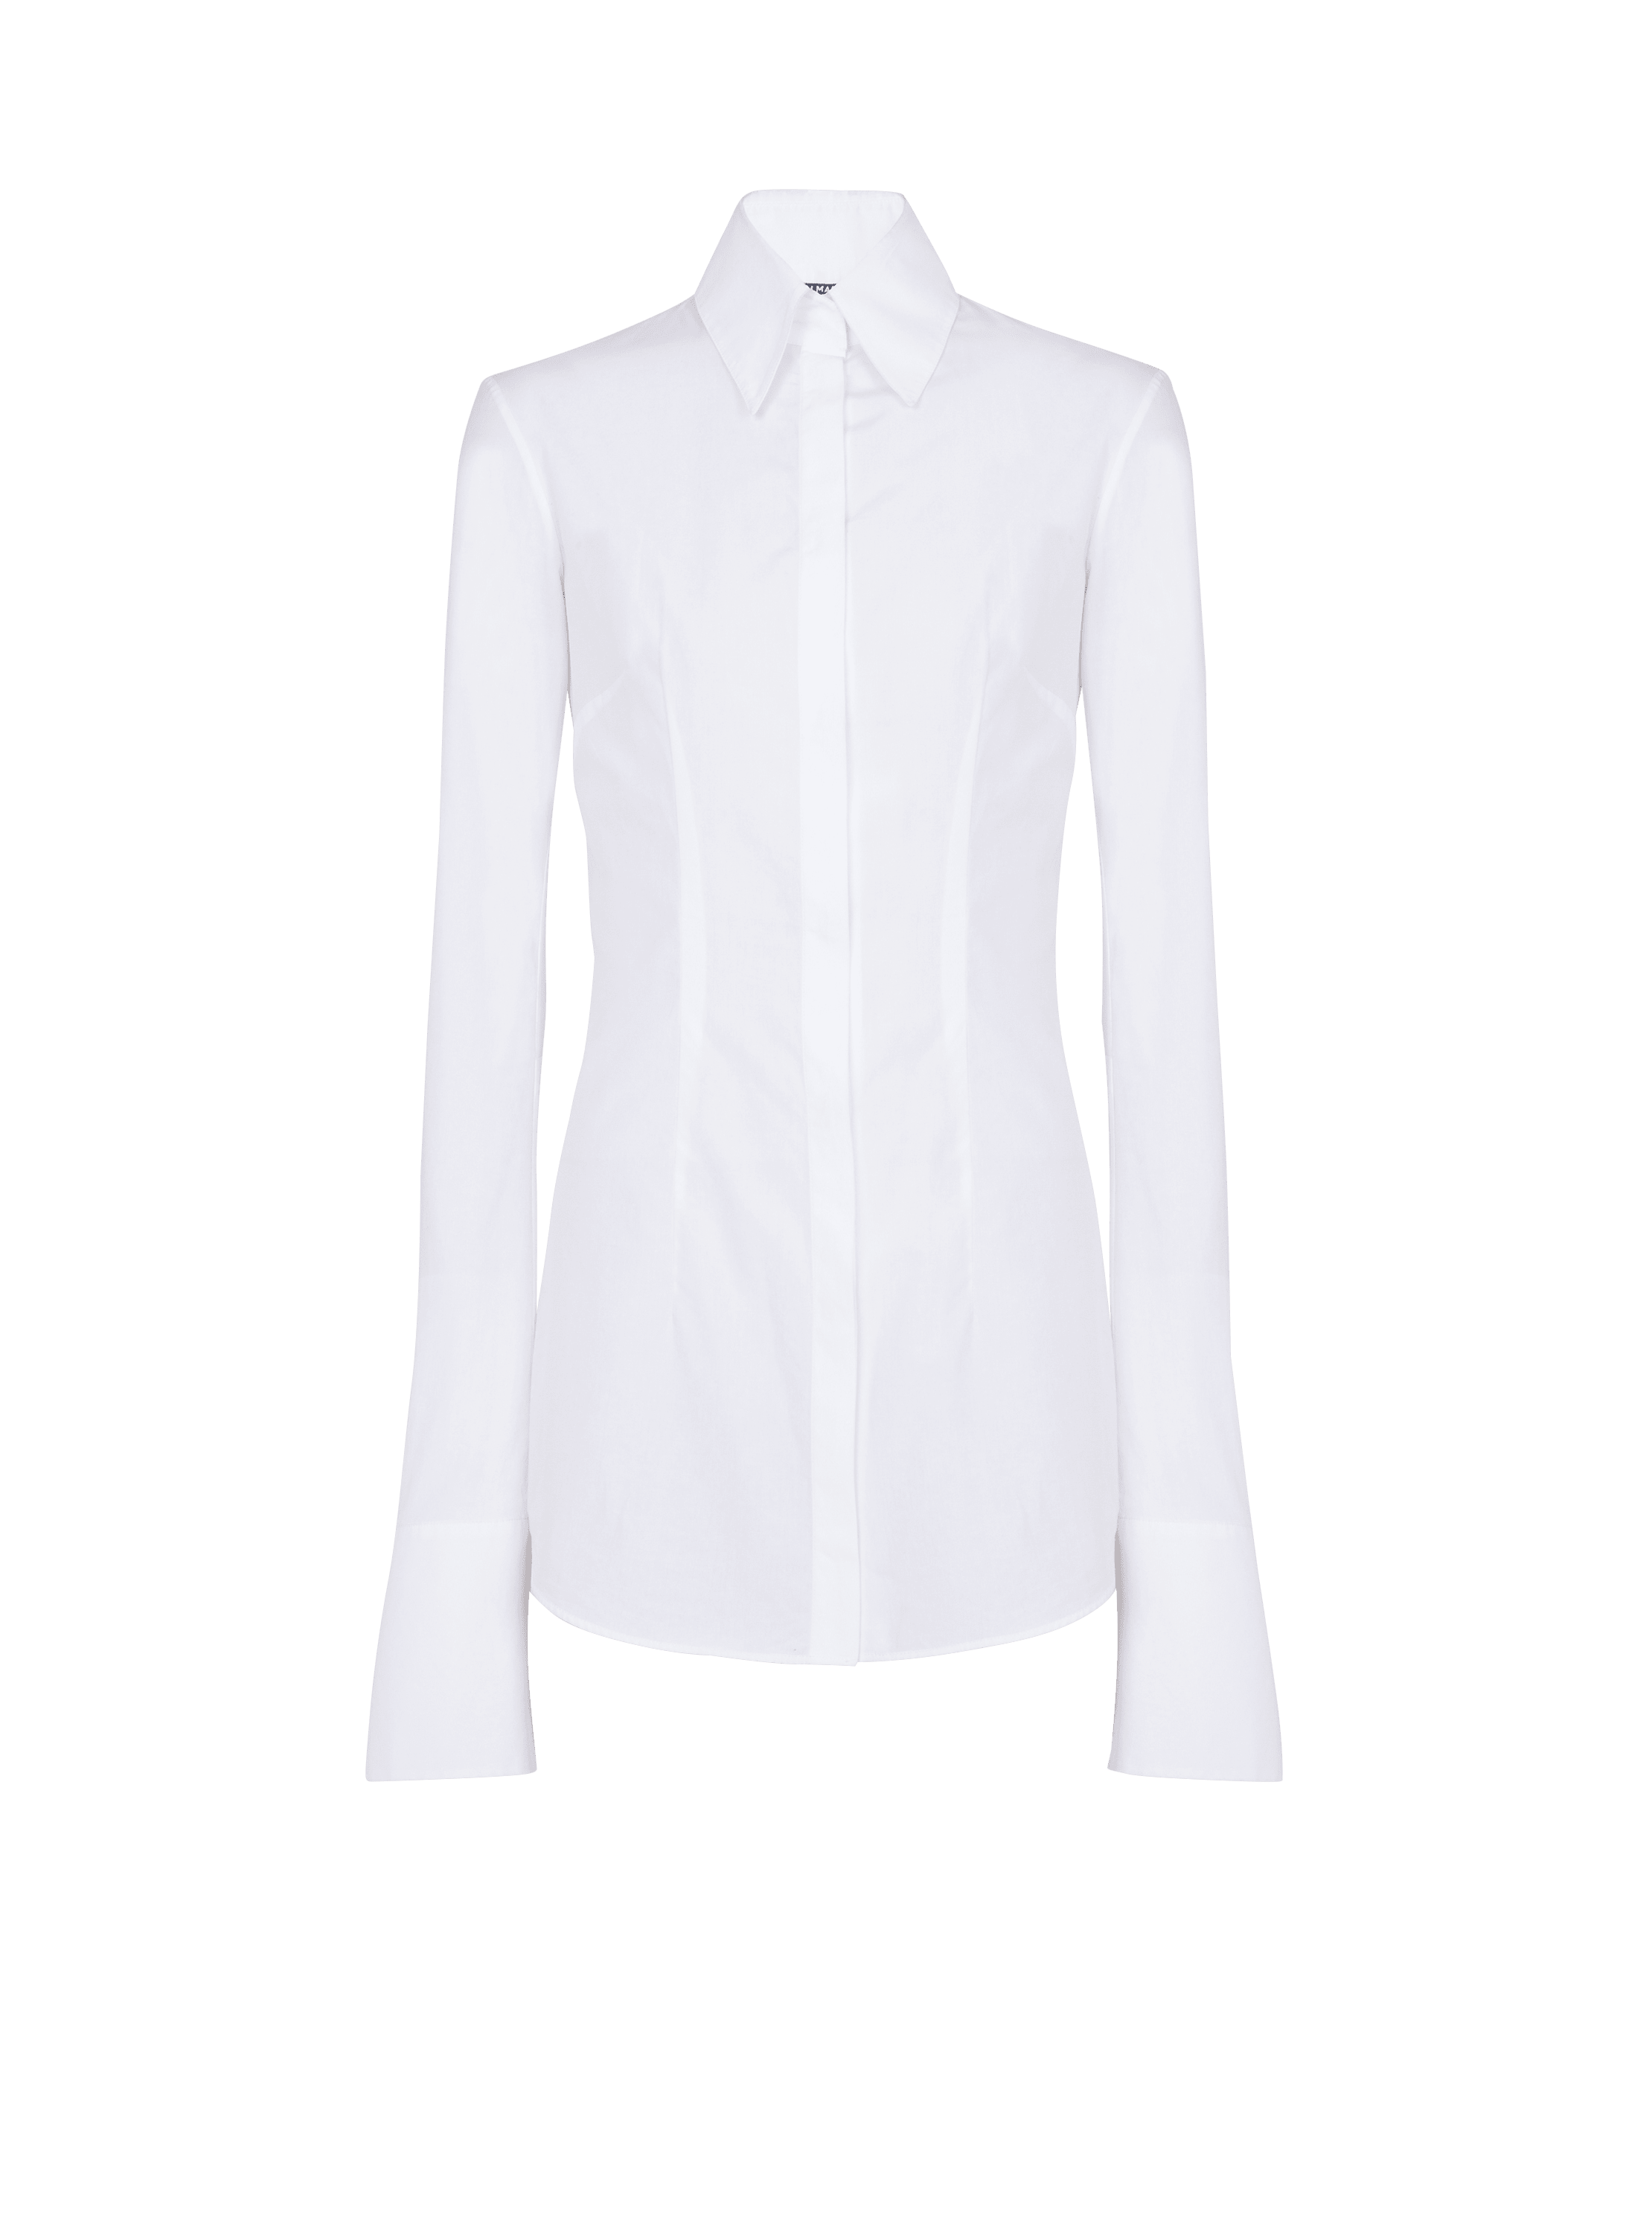 Fitted poplin shirt, white, hi-res